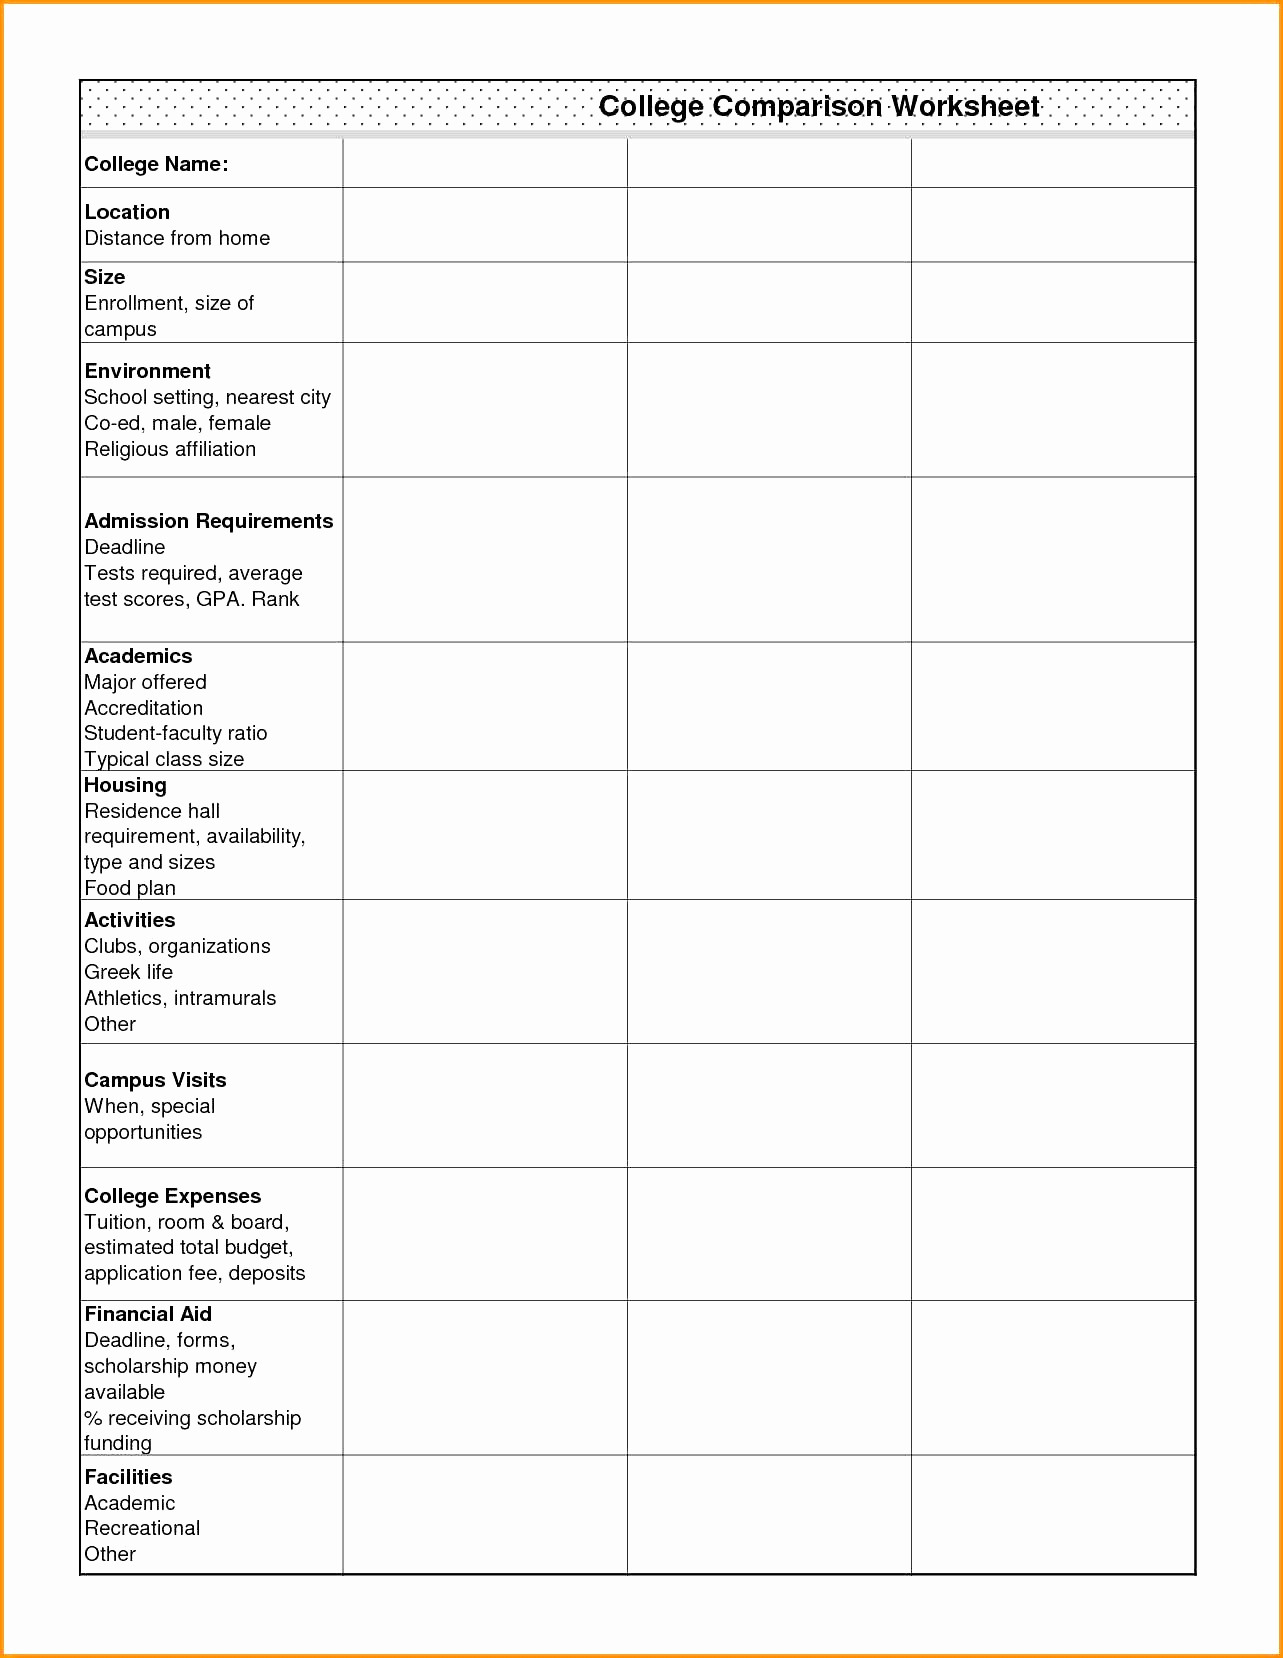 College Comparison Spreadsheet Tuition Excel Cost Worksheet